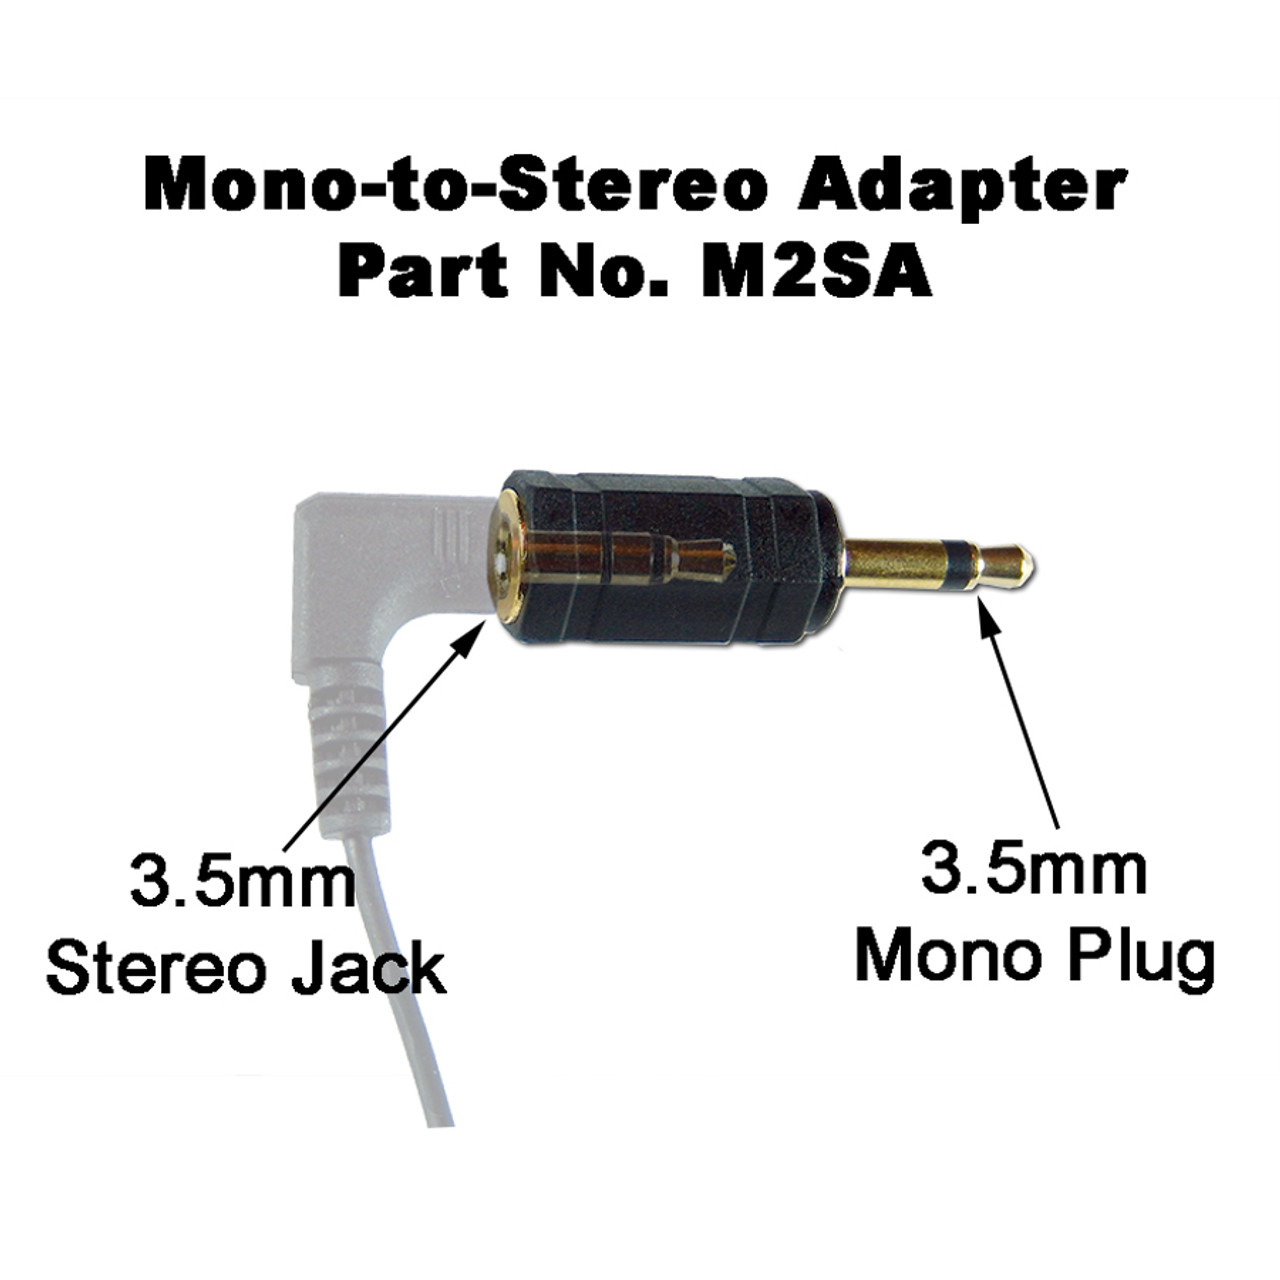 Headset Adapter (Dual 3.5mm Plug to 3.5mm Jack) Stereo Audio Cable